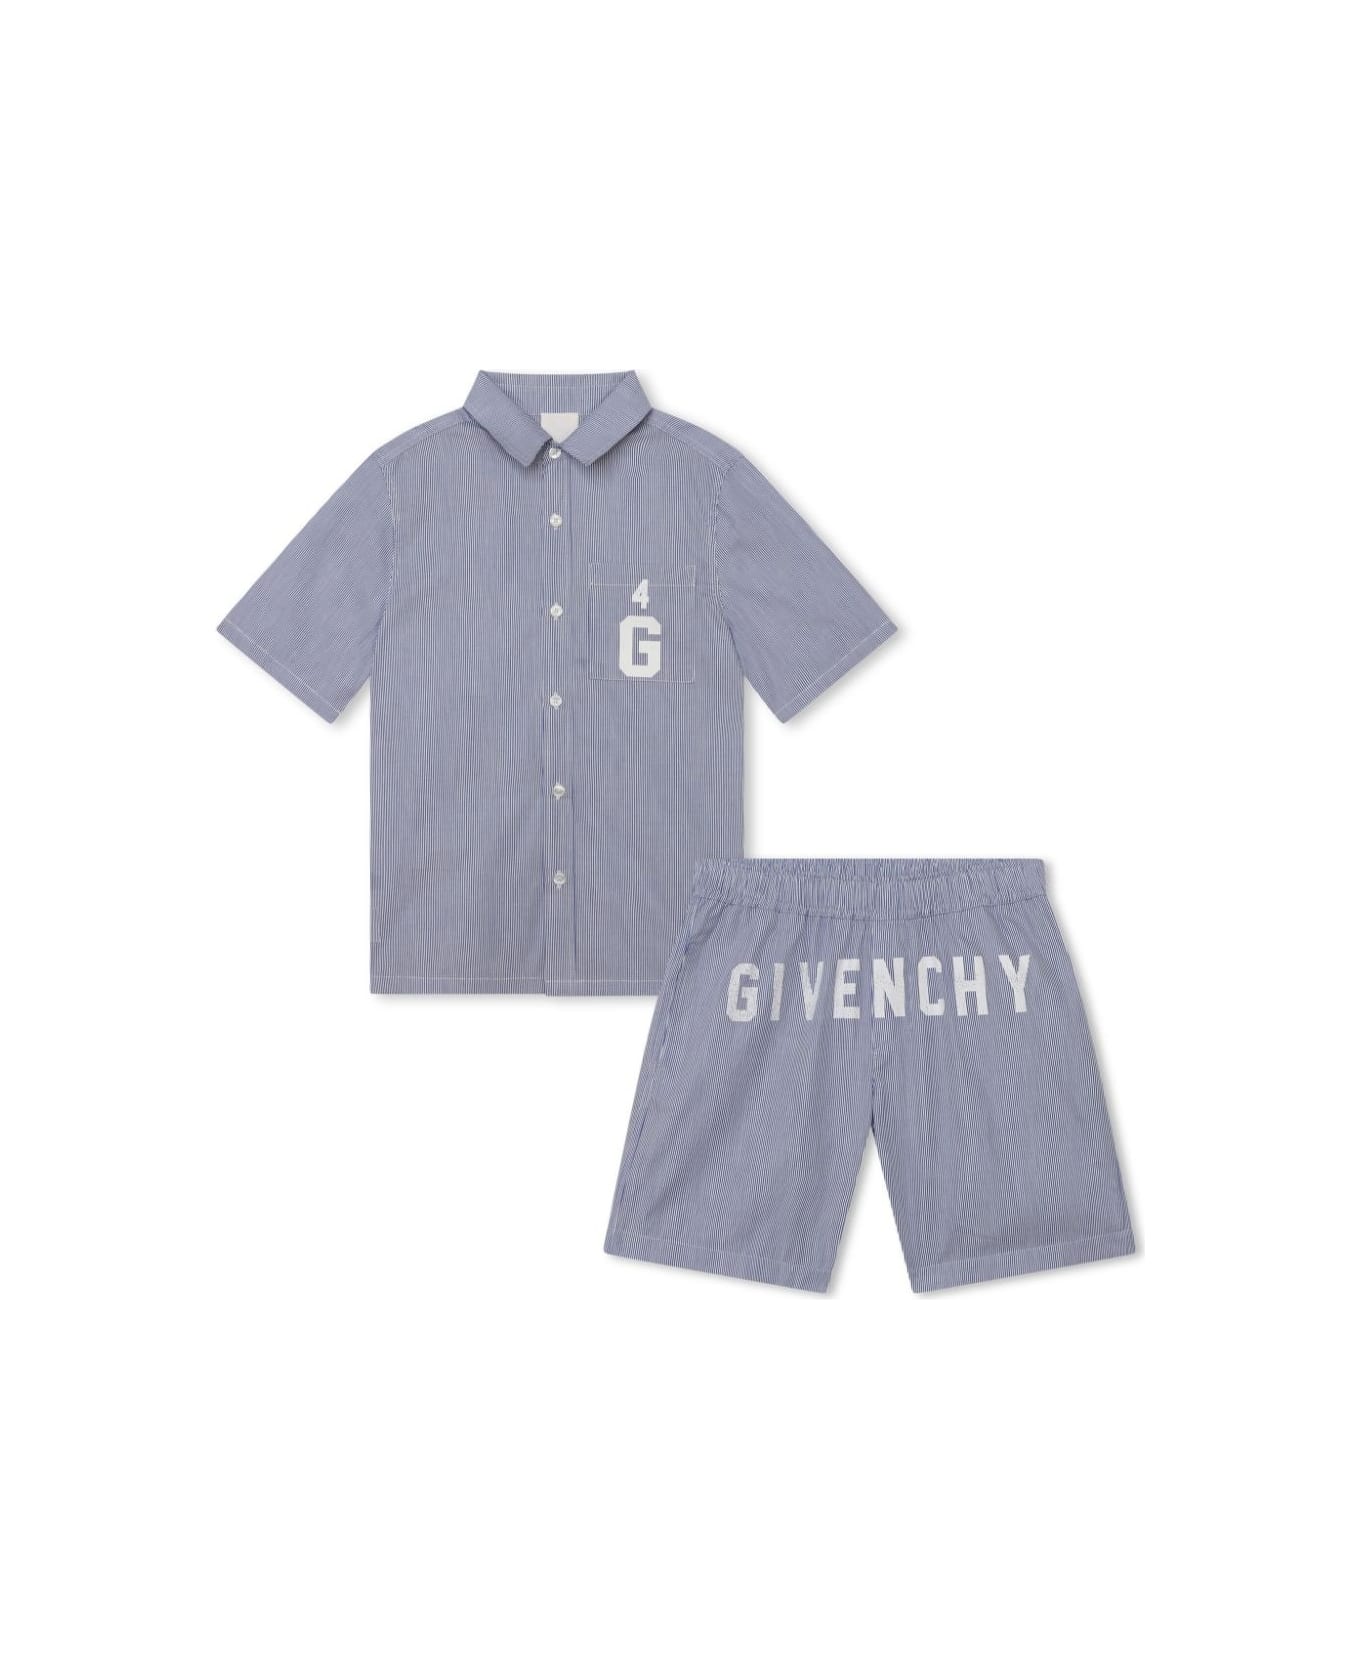 Givenchy Striped Set With Givenchy 4g Logo - Blue